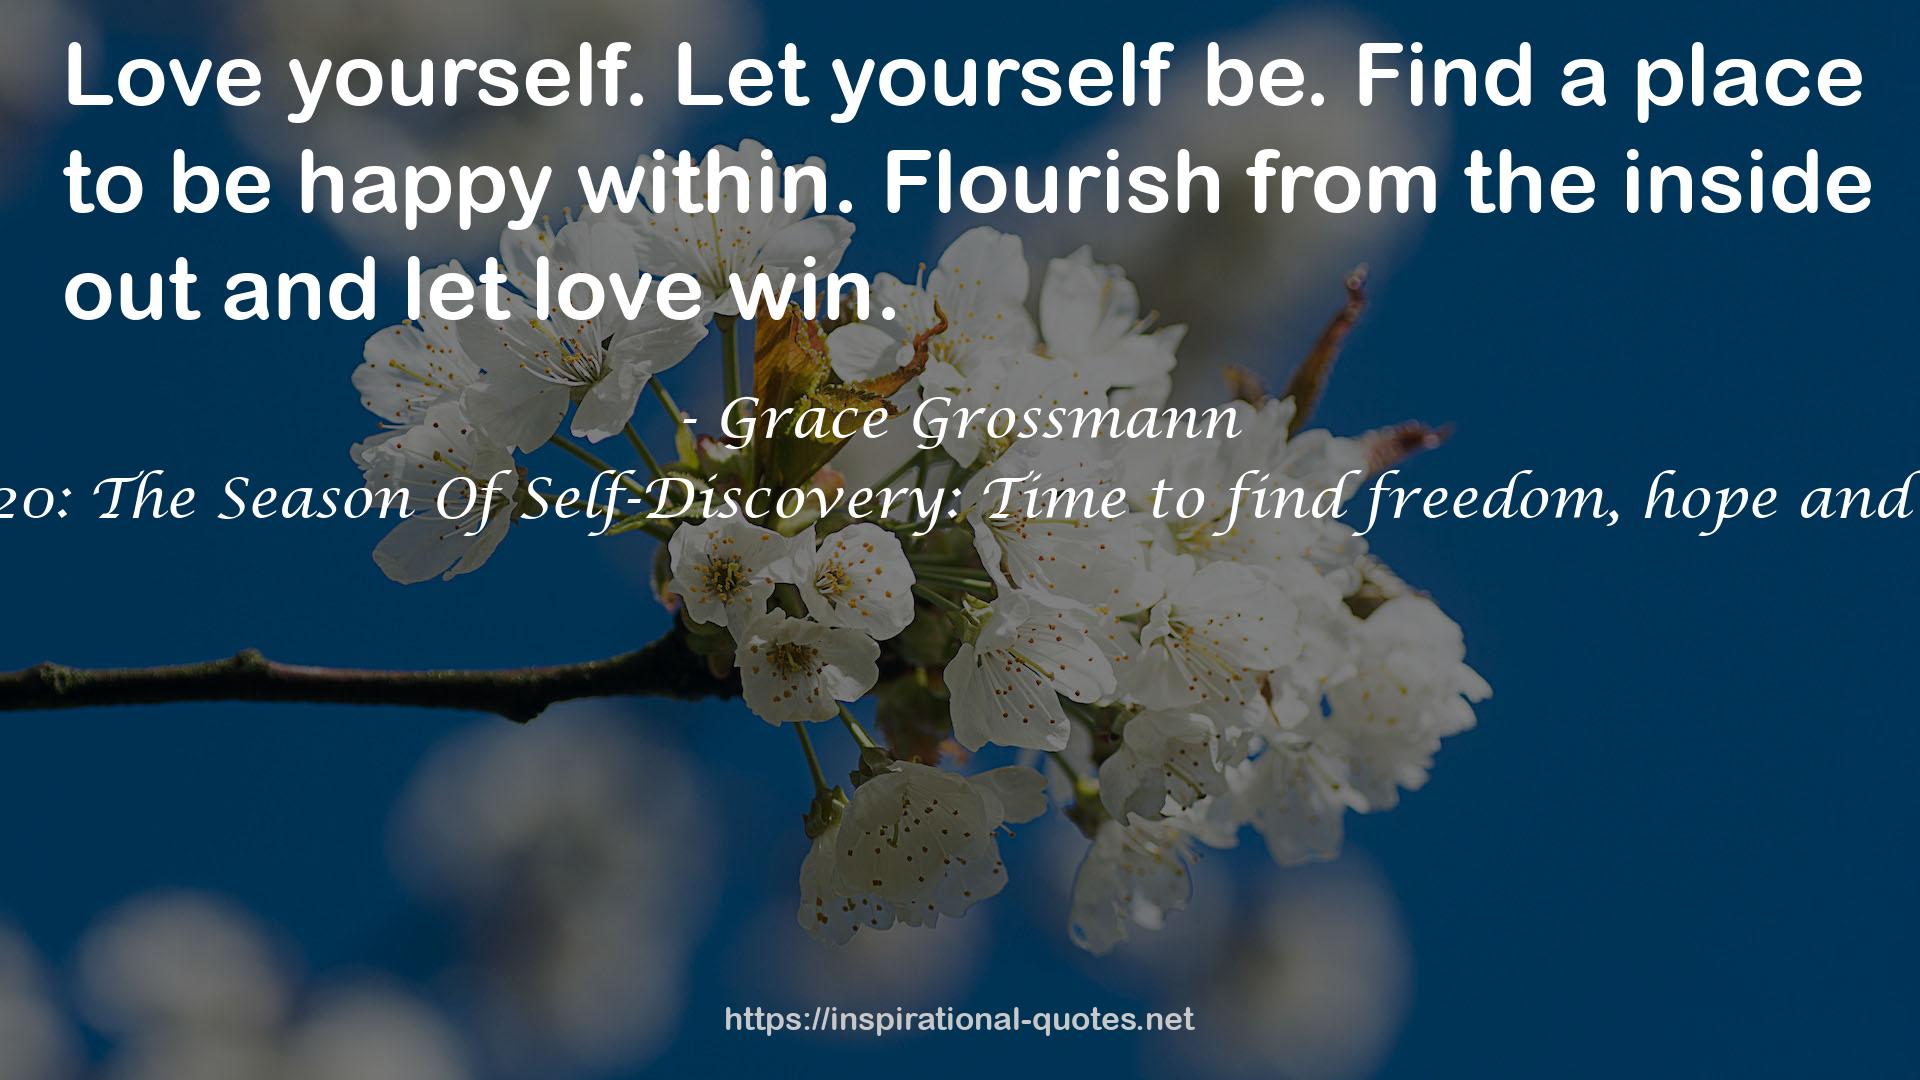 Spring 2020: The Season Of Self-Discovery: Time to find freedom, hope and happiness QUOTES